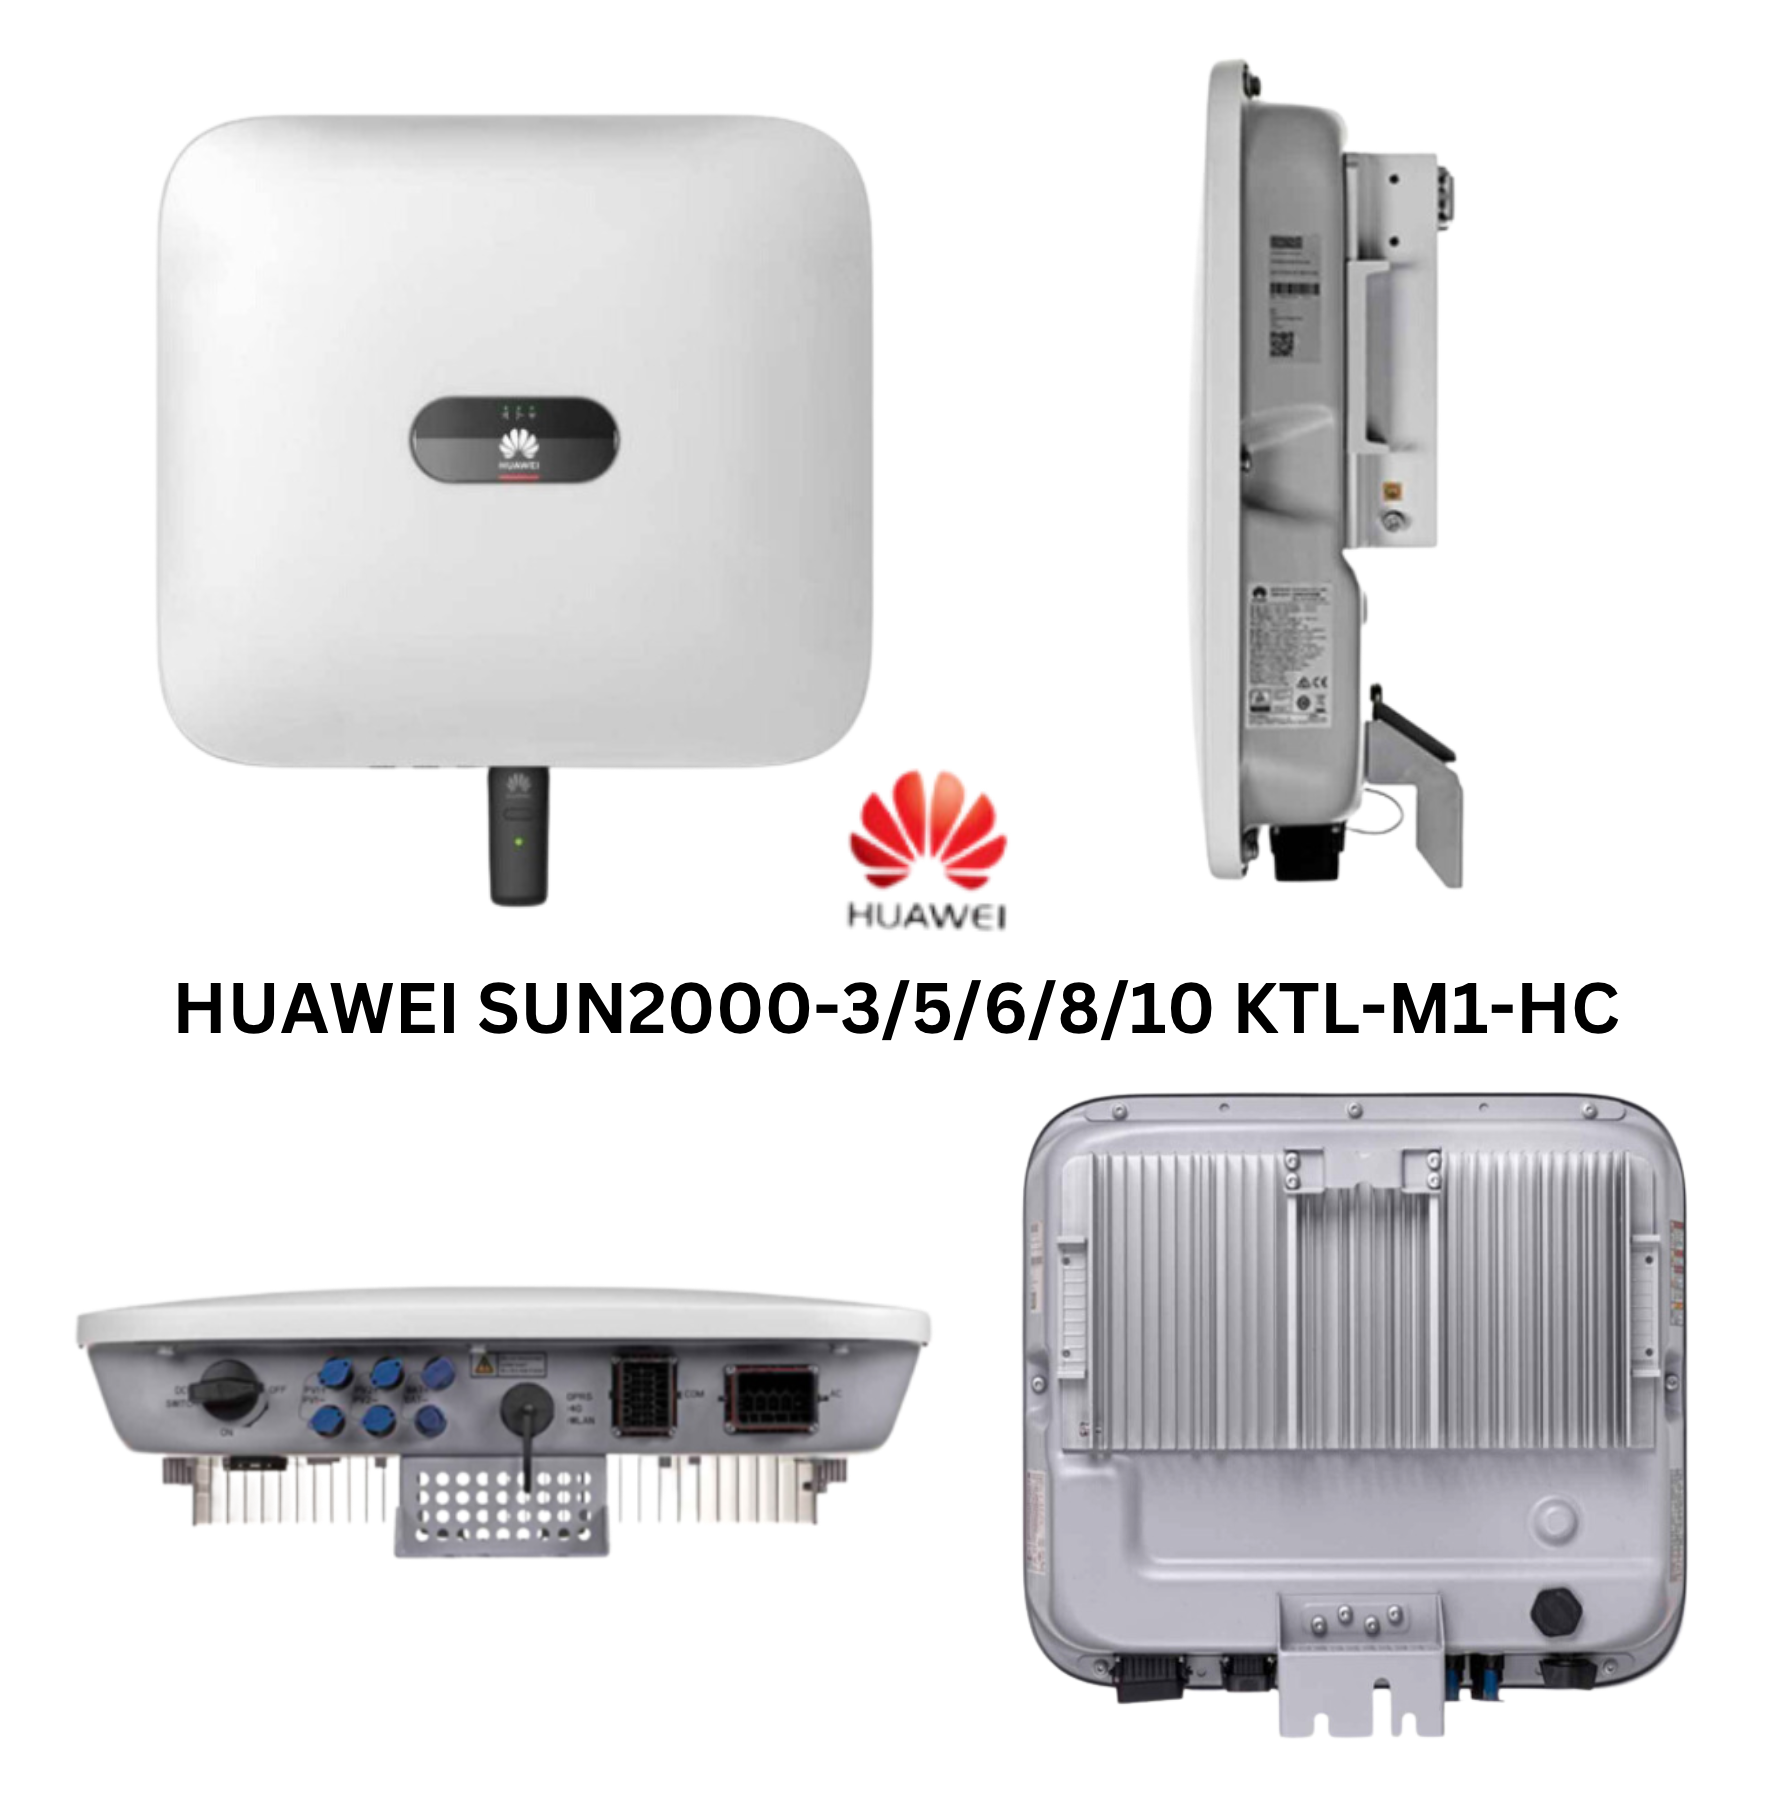 Huawei Complete PV-System Set - [5kW + 10kWh]